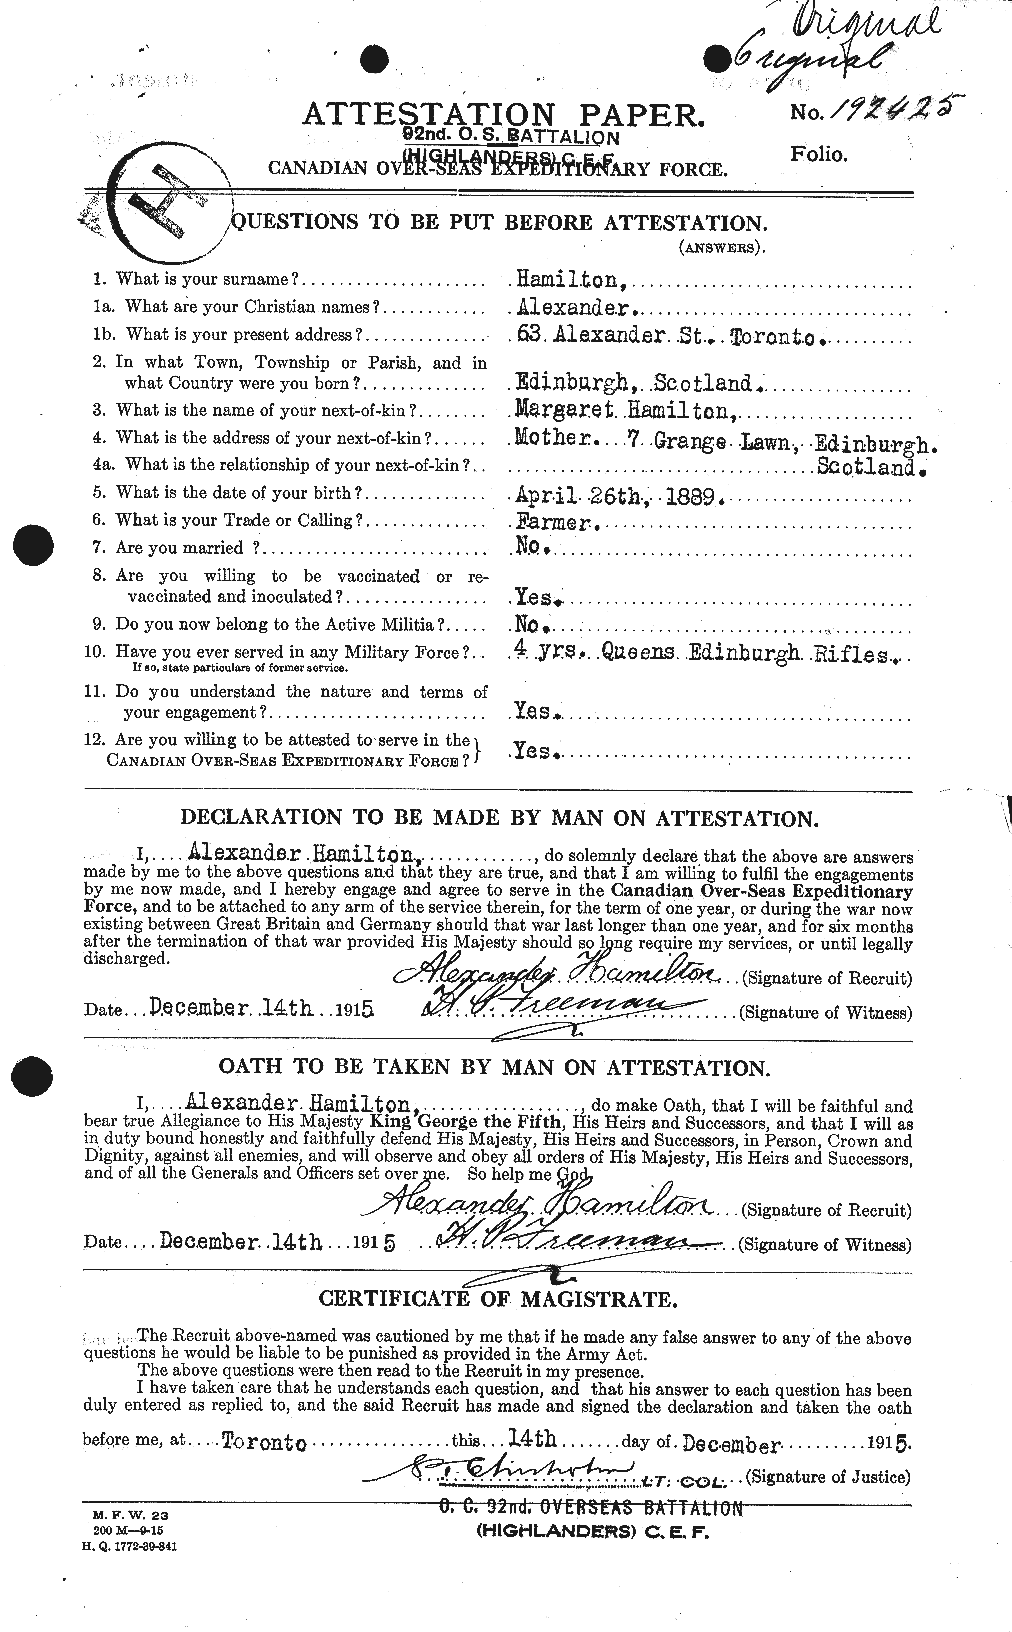 Personnel Records of the First World War - CEF 375192a